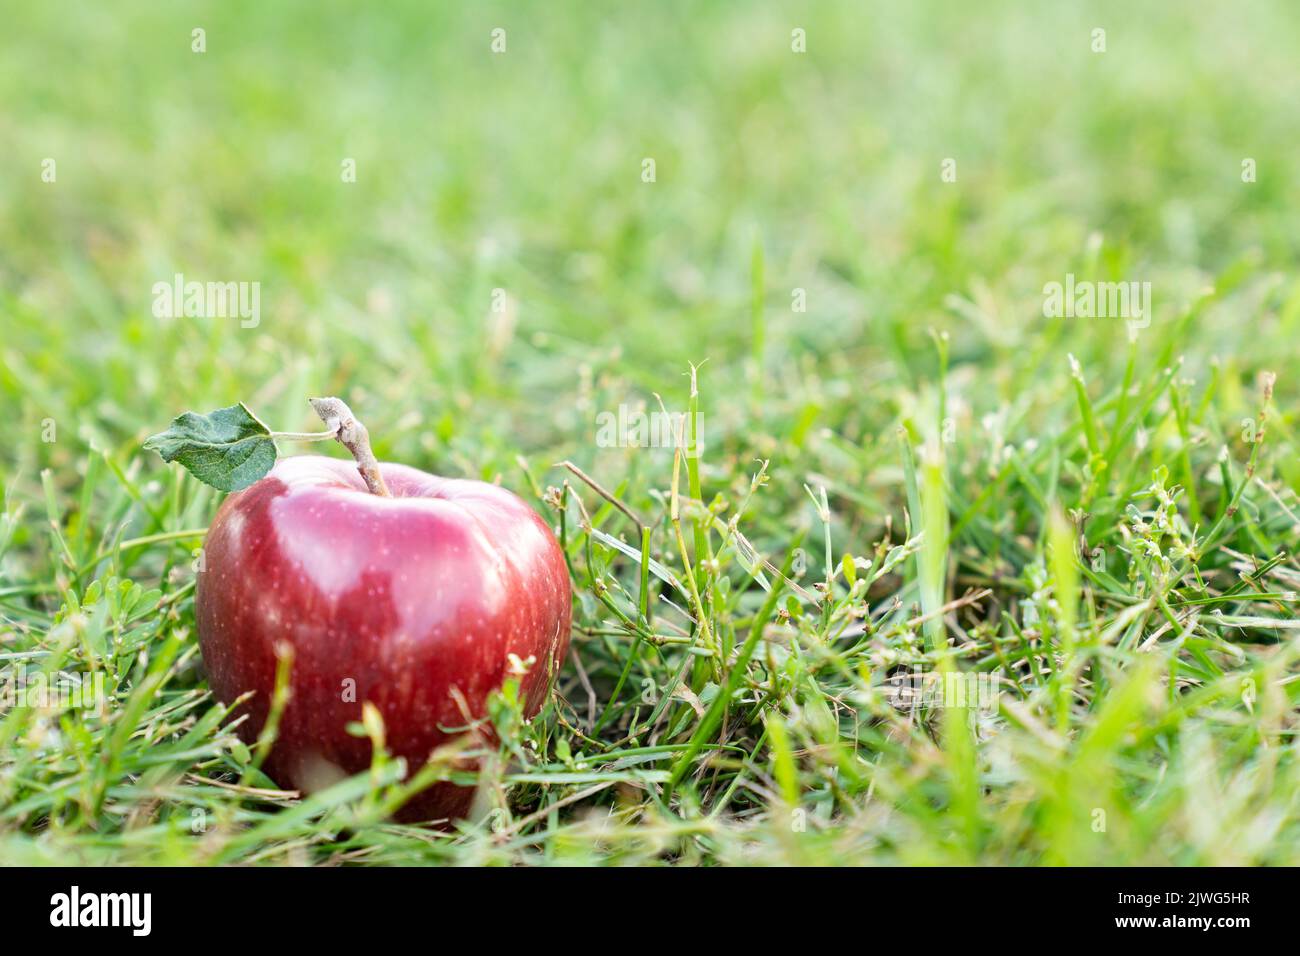 Red ripe apple on the ground in an orchard, garden Stock Photo